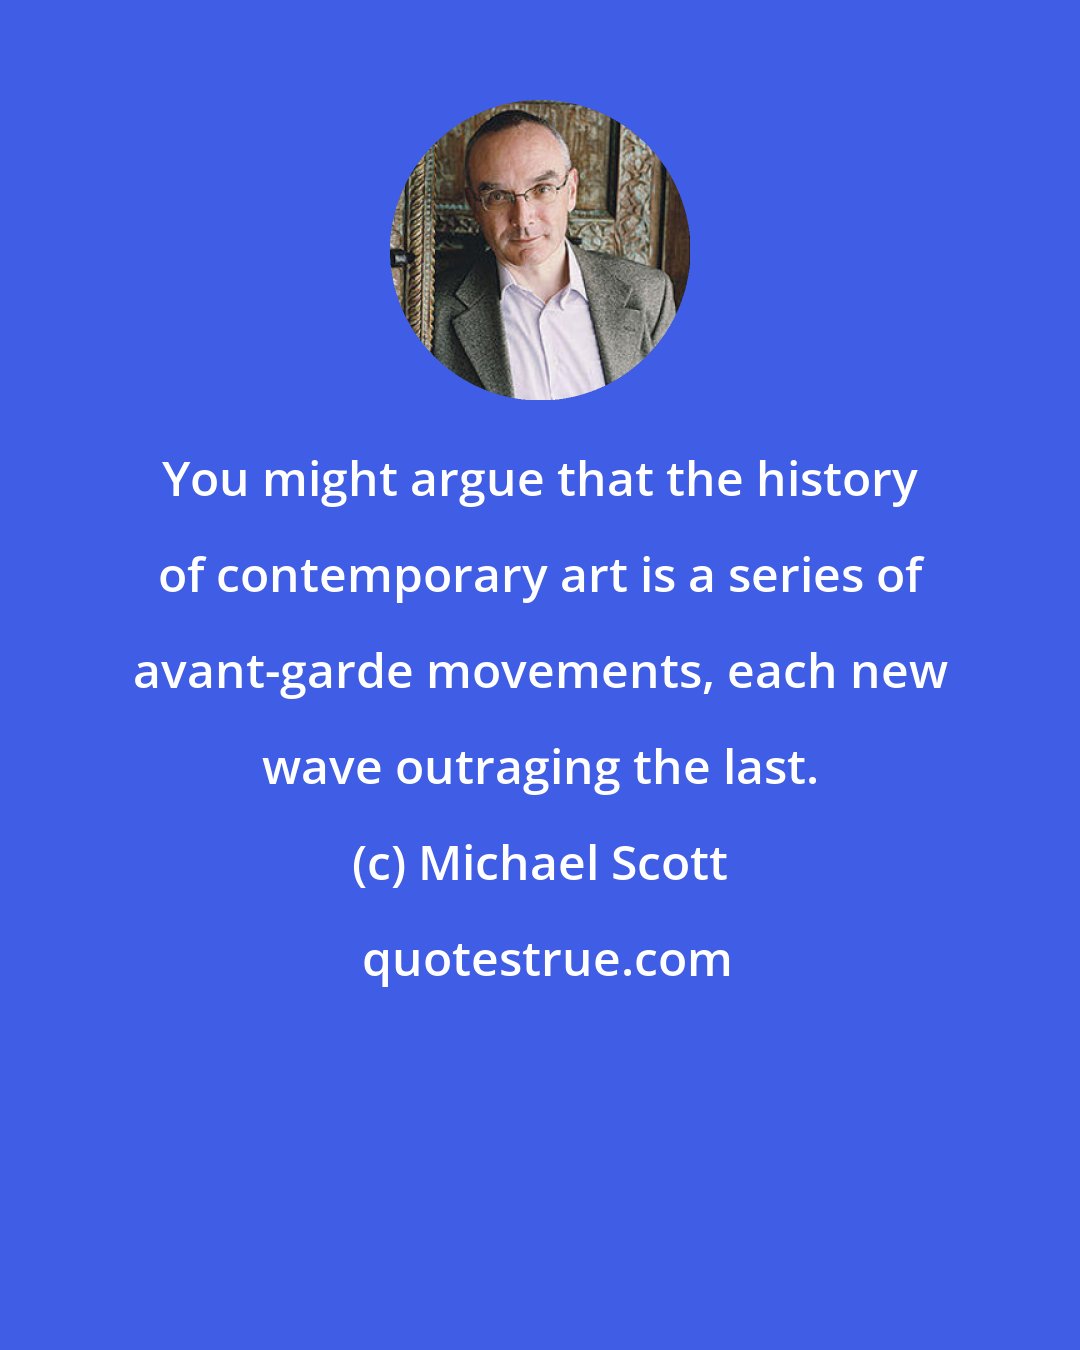 Michael Scott: You might argue that the history of contemporary art is a series of avant-garde movements, each new wave outraging the last.